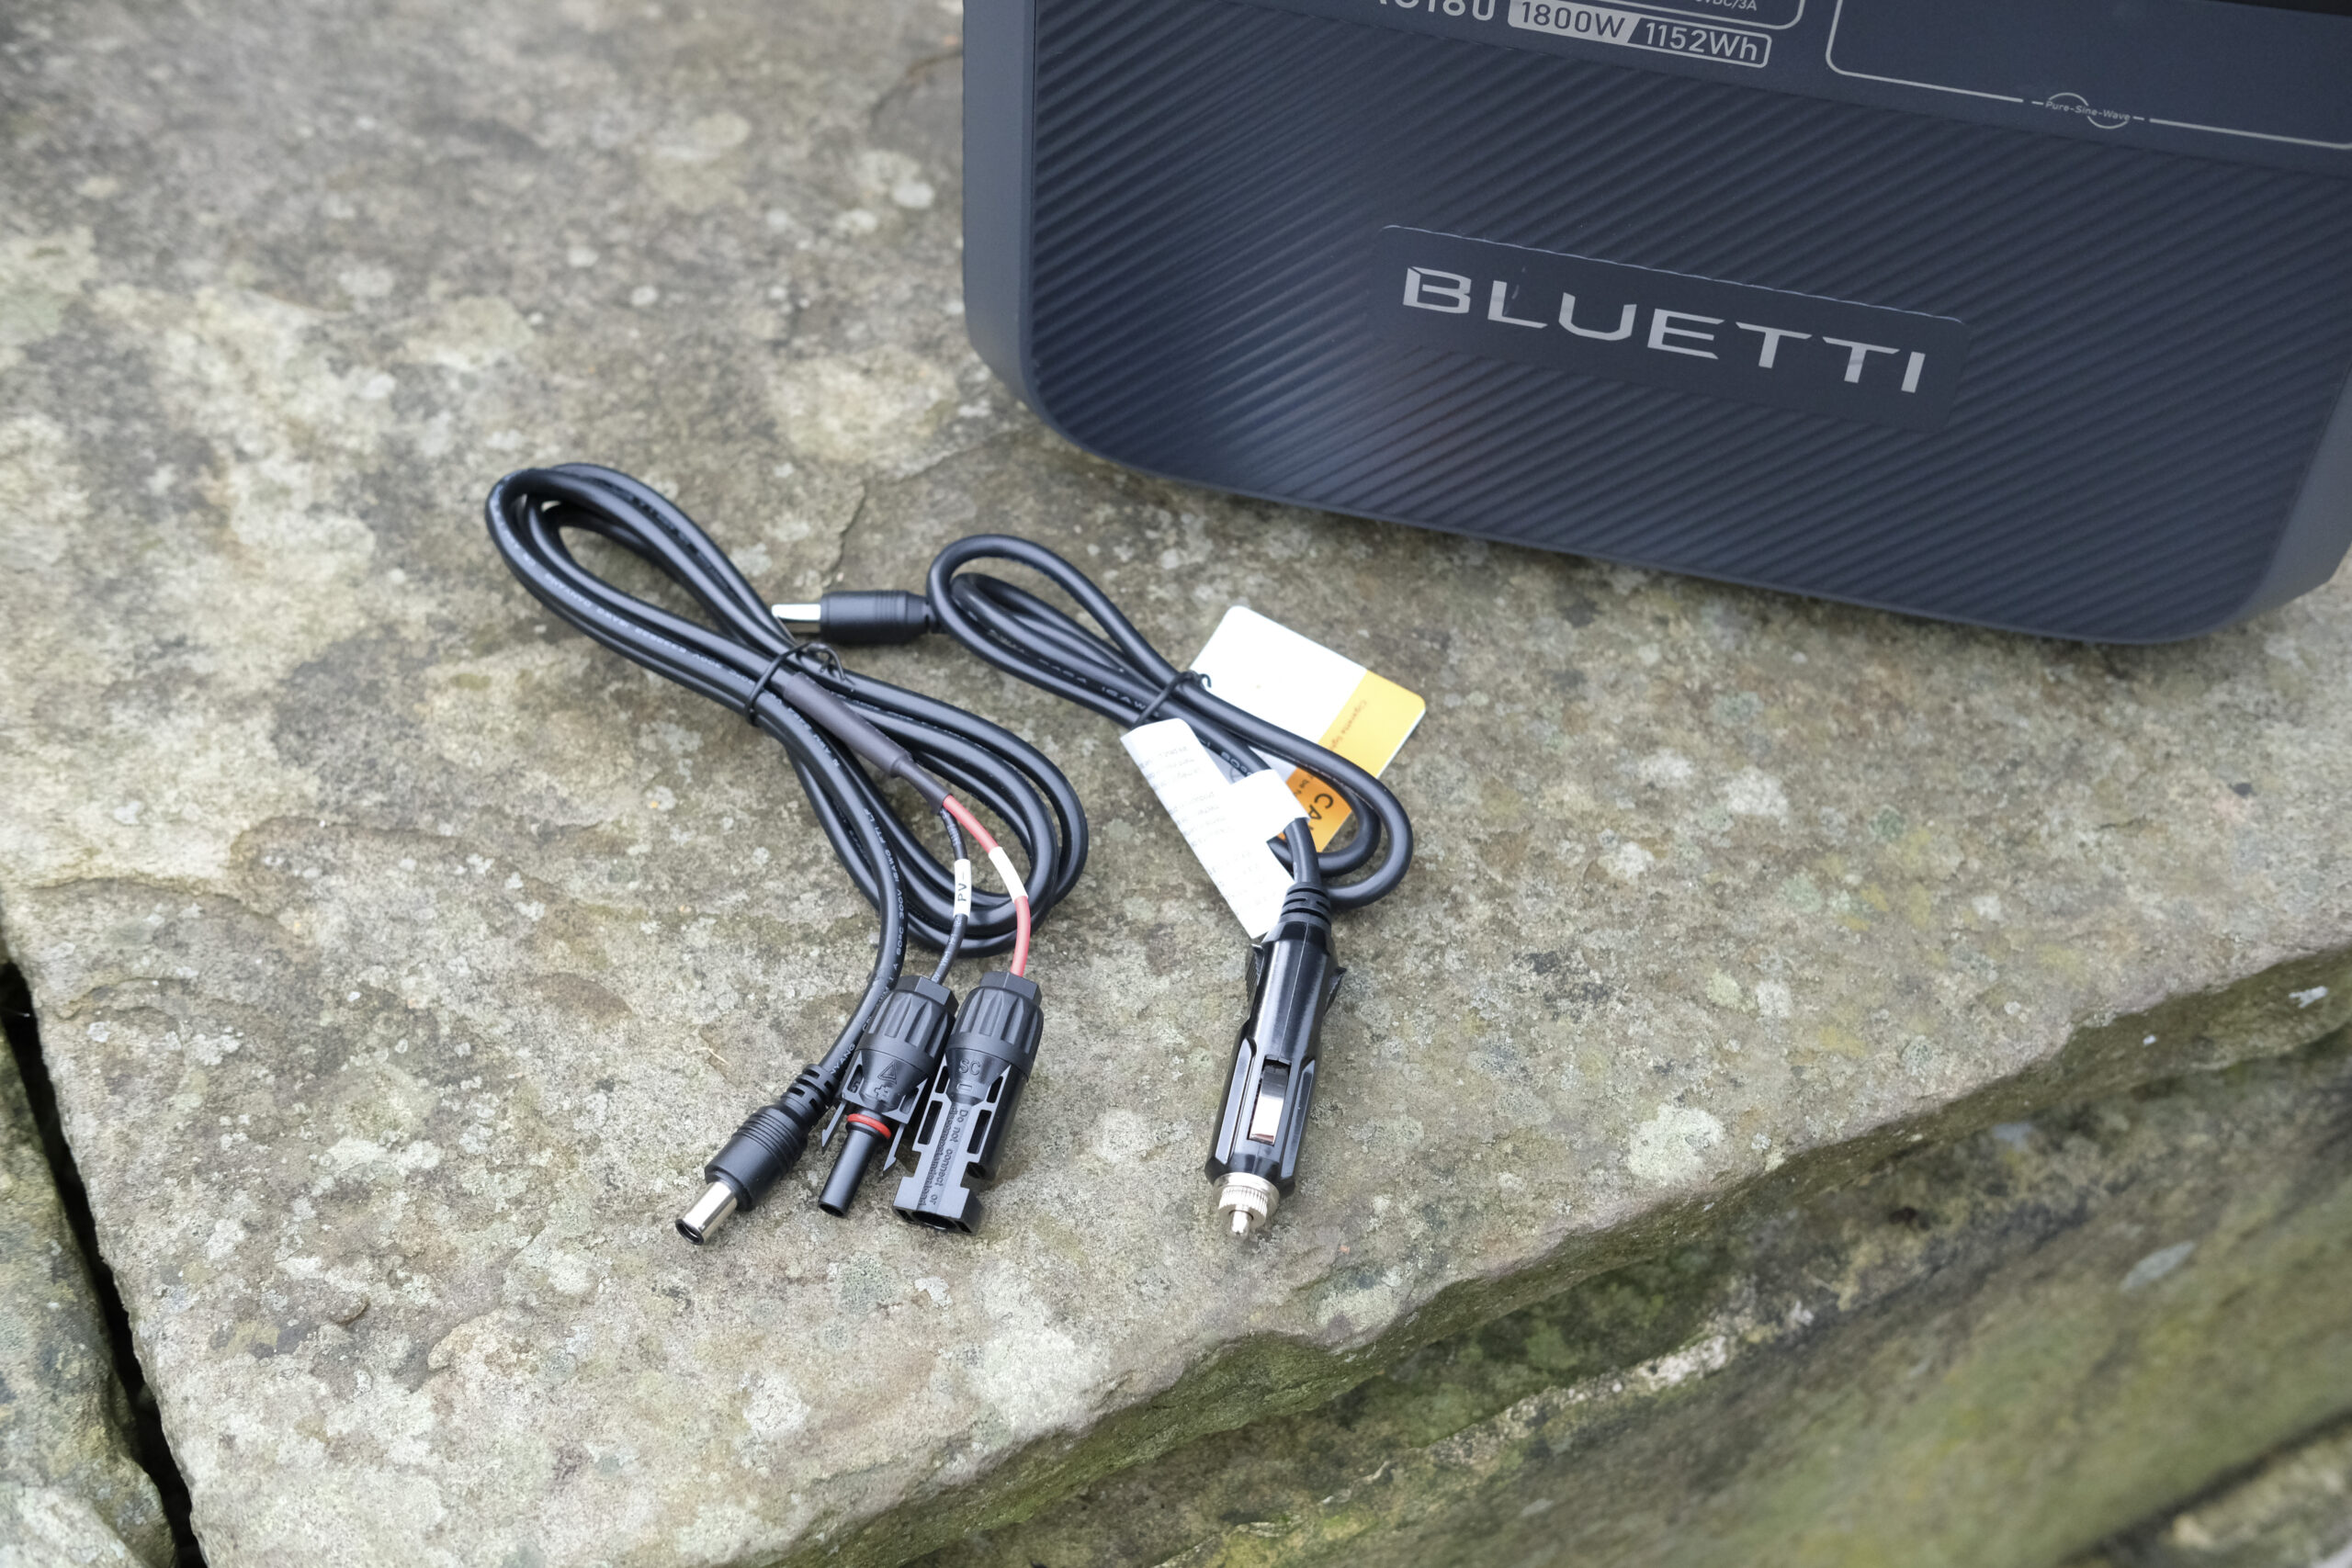 NEW Bluetti AC180 - We've Been Waiting For This! 1152wh LFP - 1800w  Inverter - UPS / Fast Charging! 